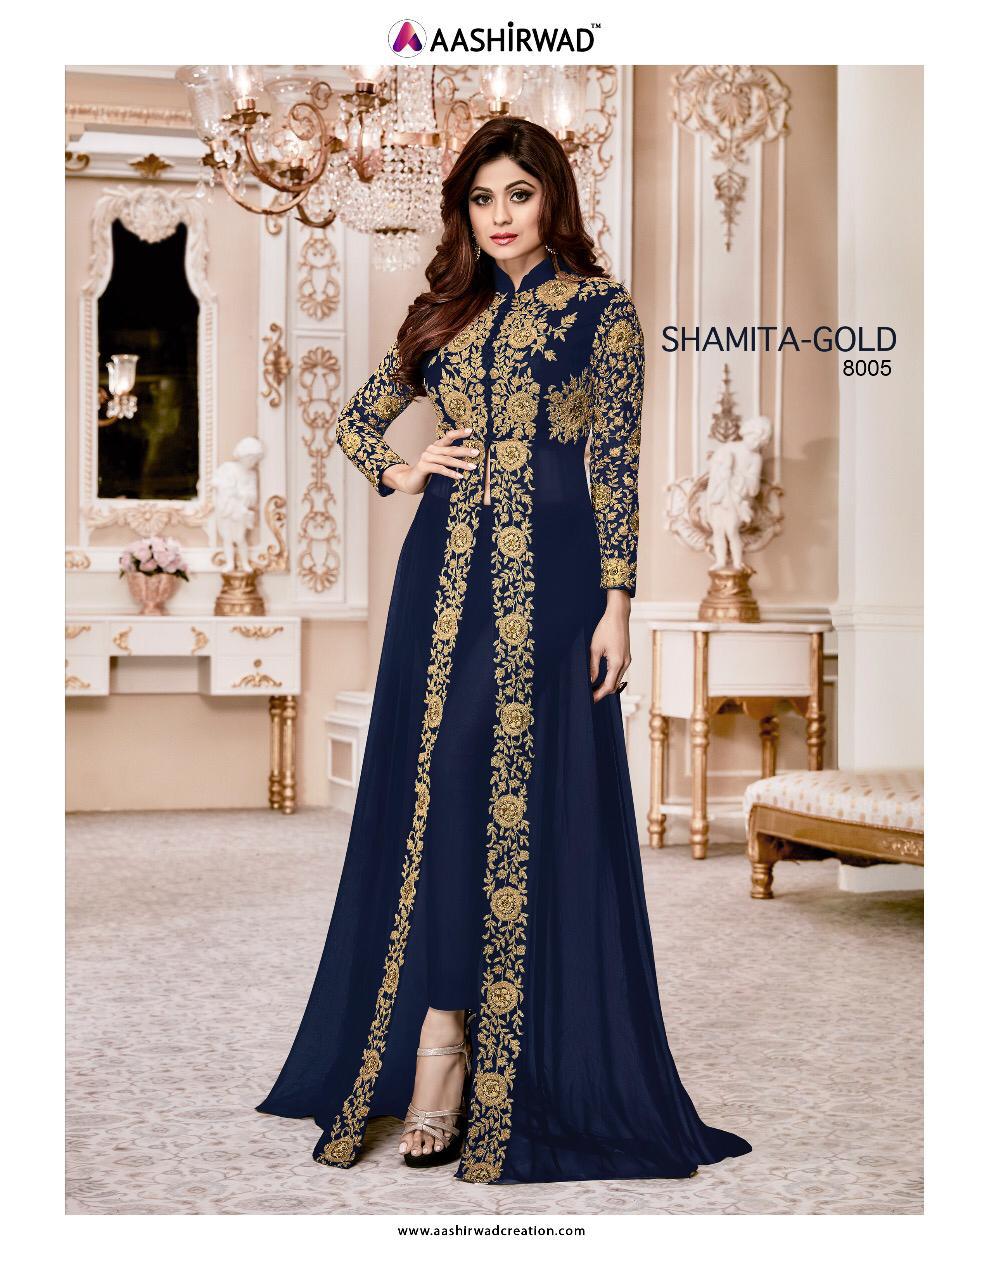 aashirwad creation shamita gold fancy designer collection of outfits